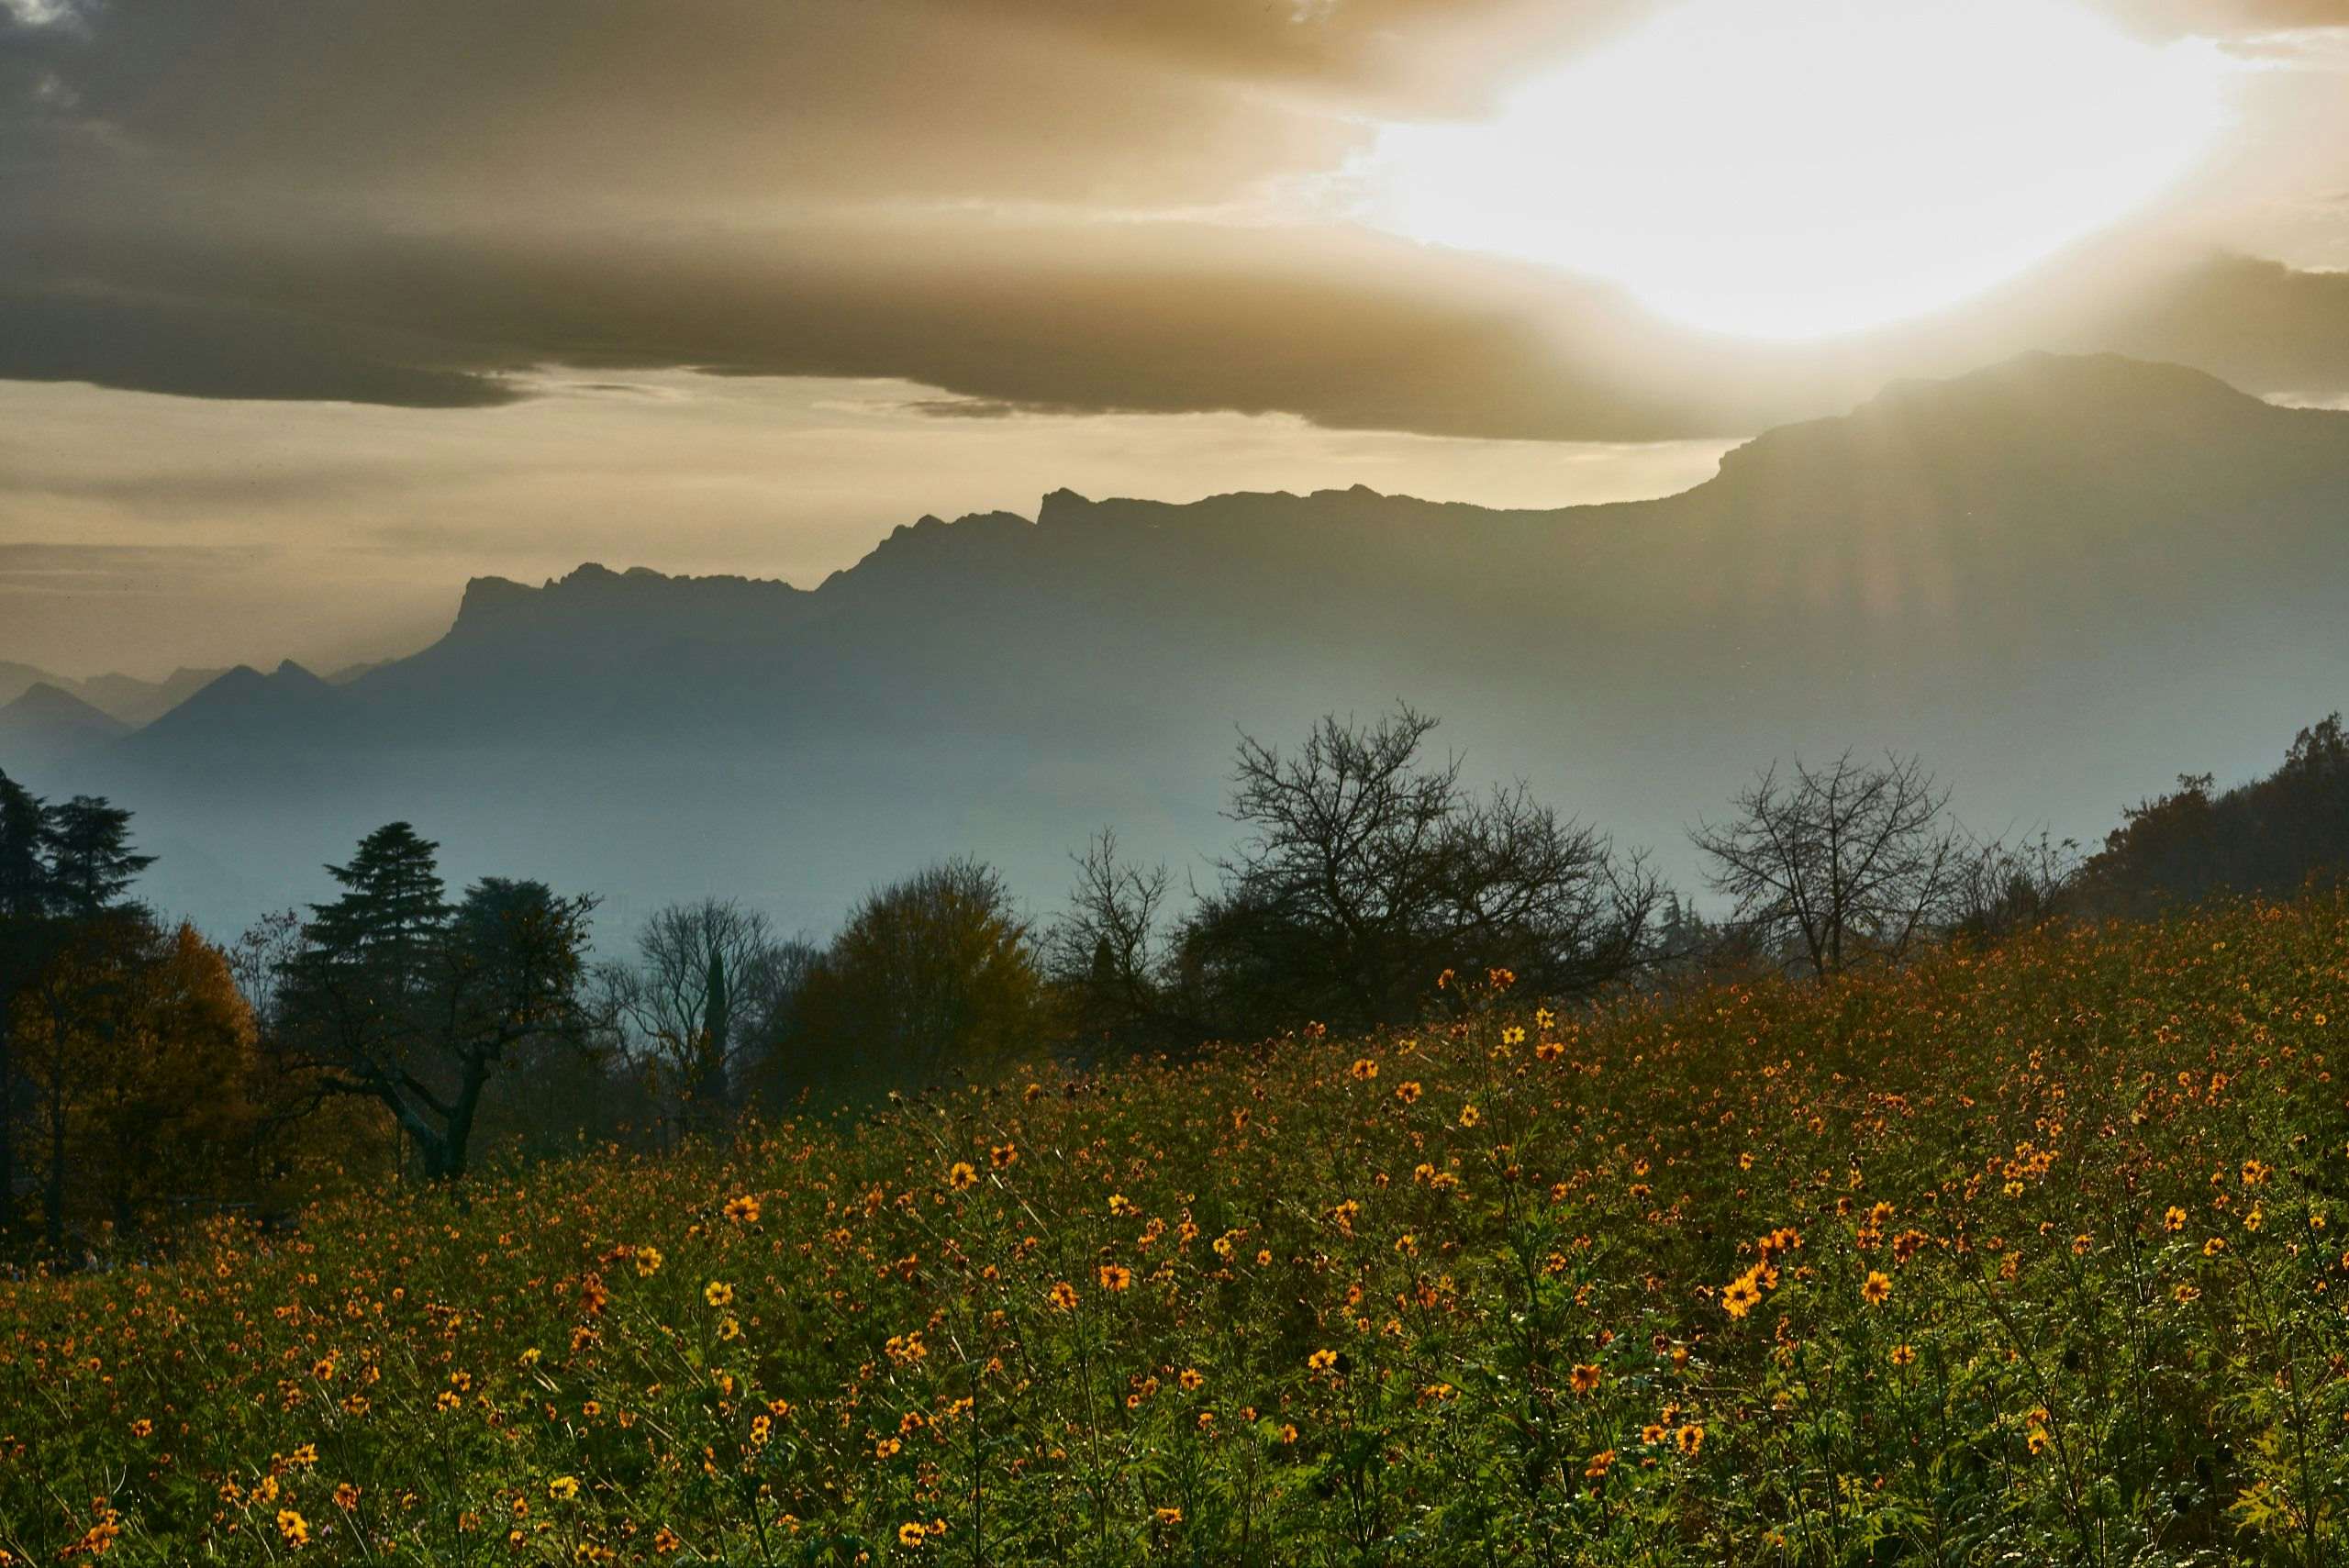 Sunset over Grenoble, shot from Clos des Capucins in Meylan, France. Photography by Xavier Wendling.